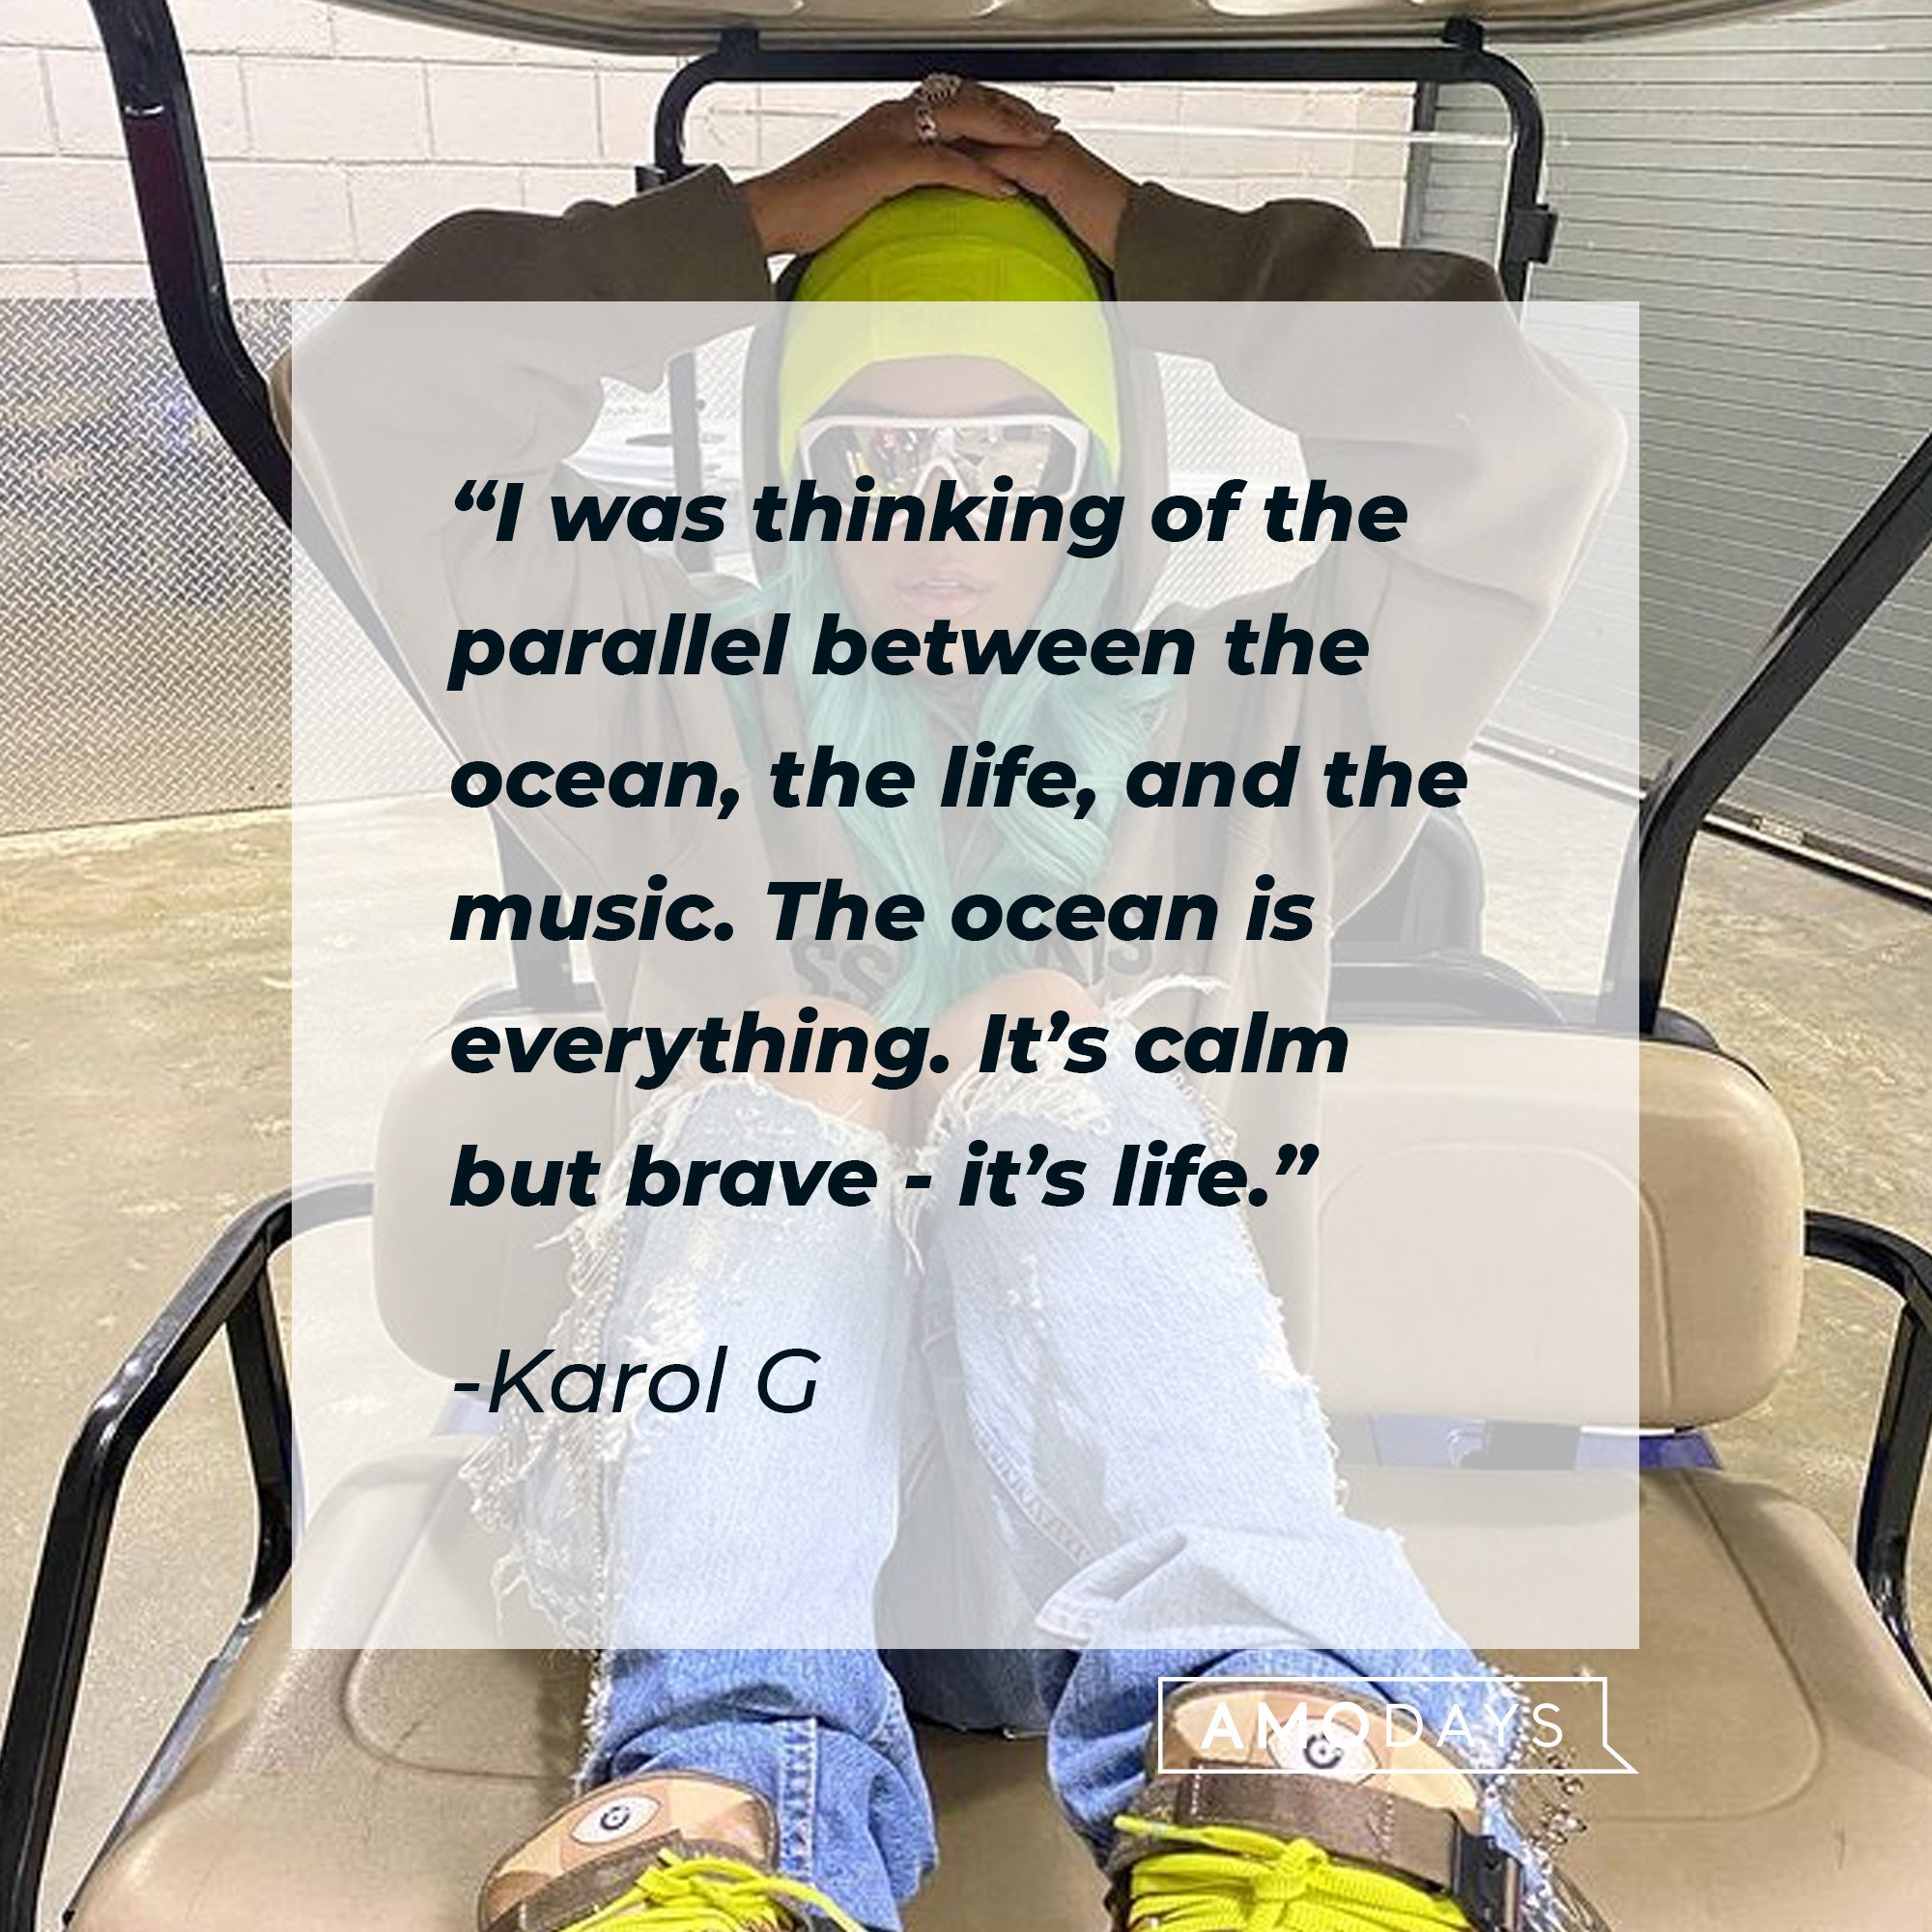  Karol G’s quote: "I was thinking of the parallel between the ocean, the life, and the music. The ocean is everything. It’s calm but brave - it's life." | Image: AmoDays